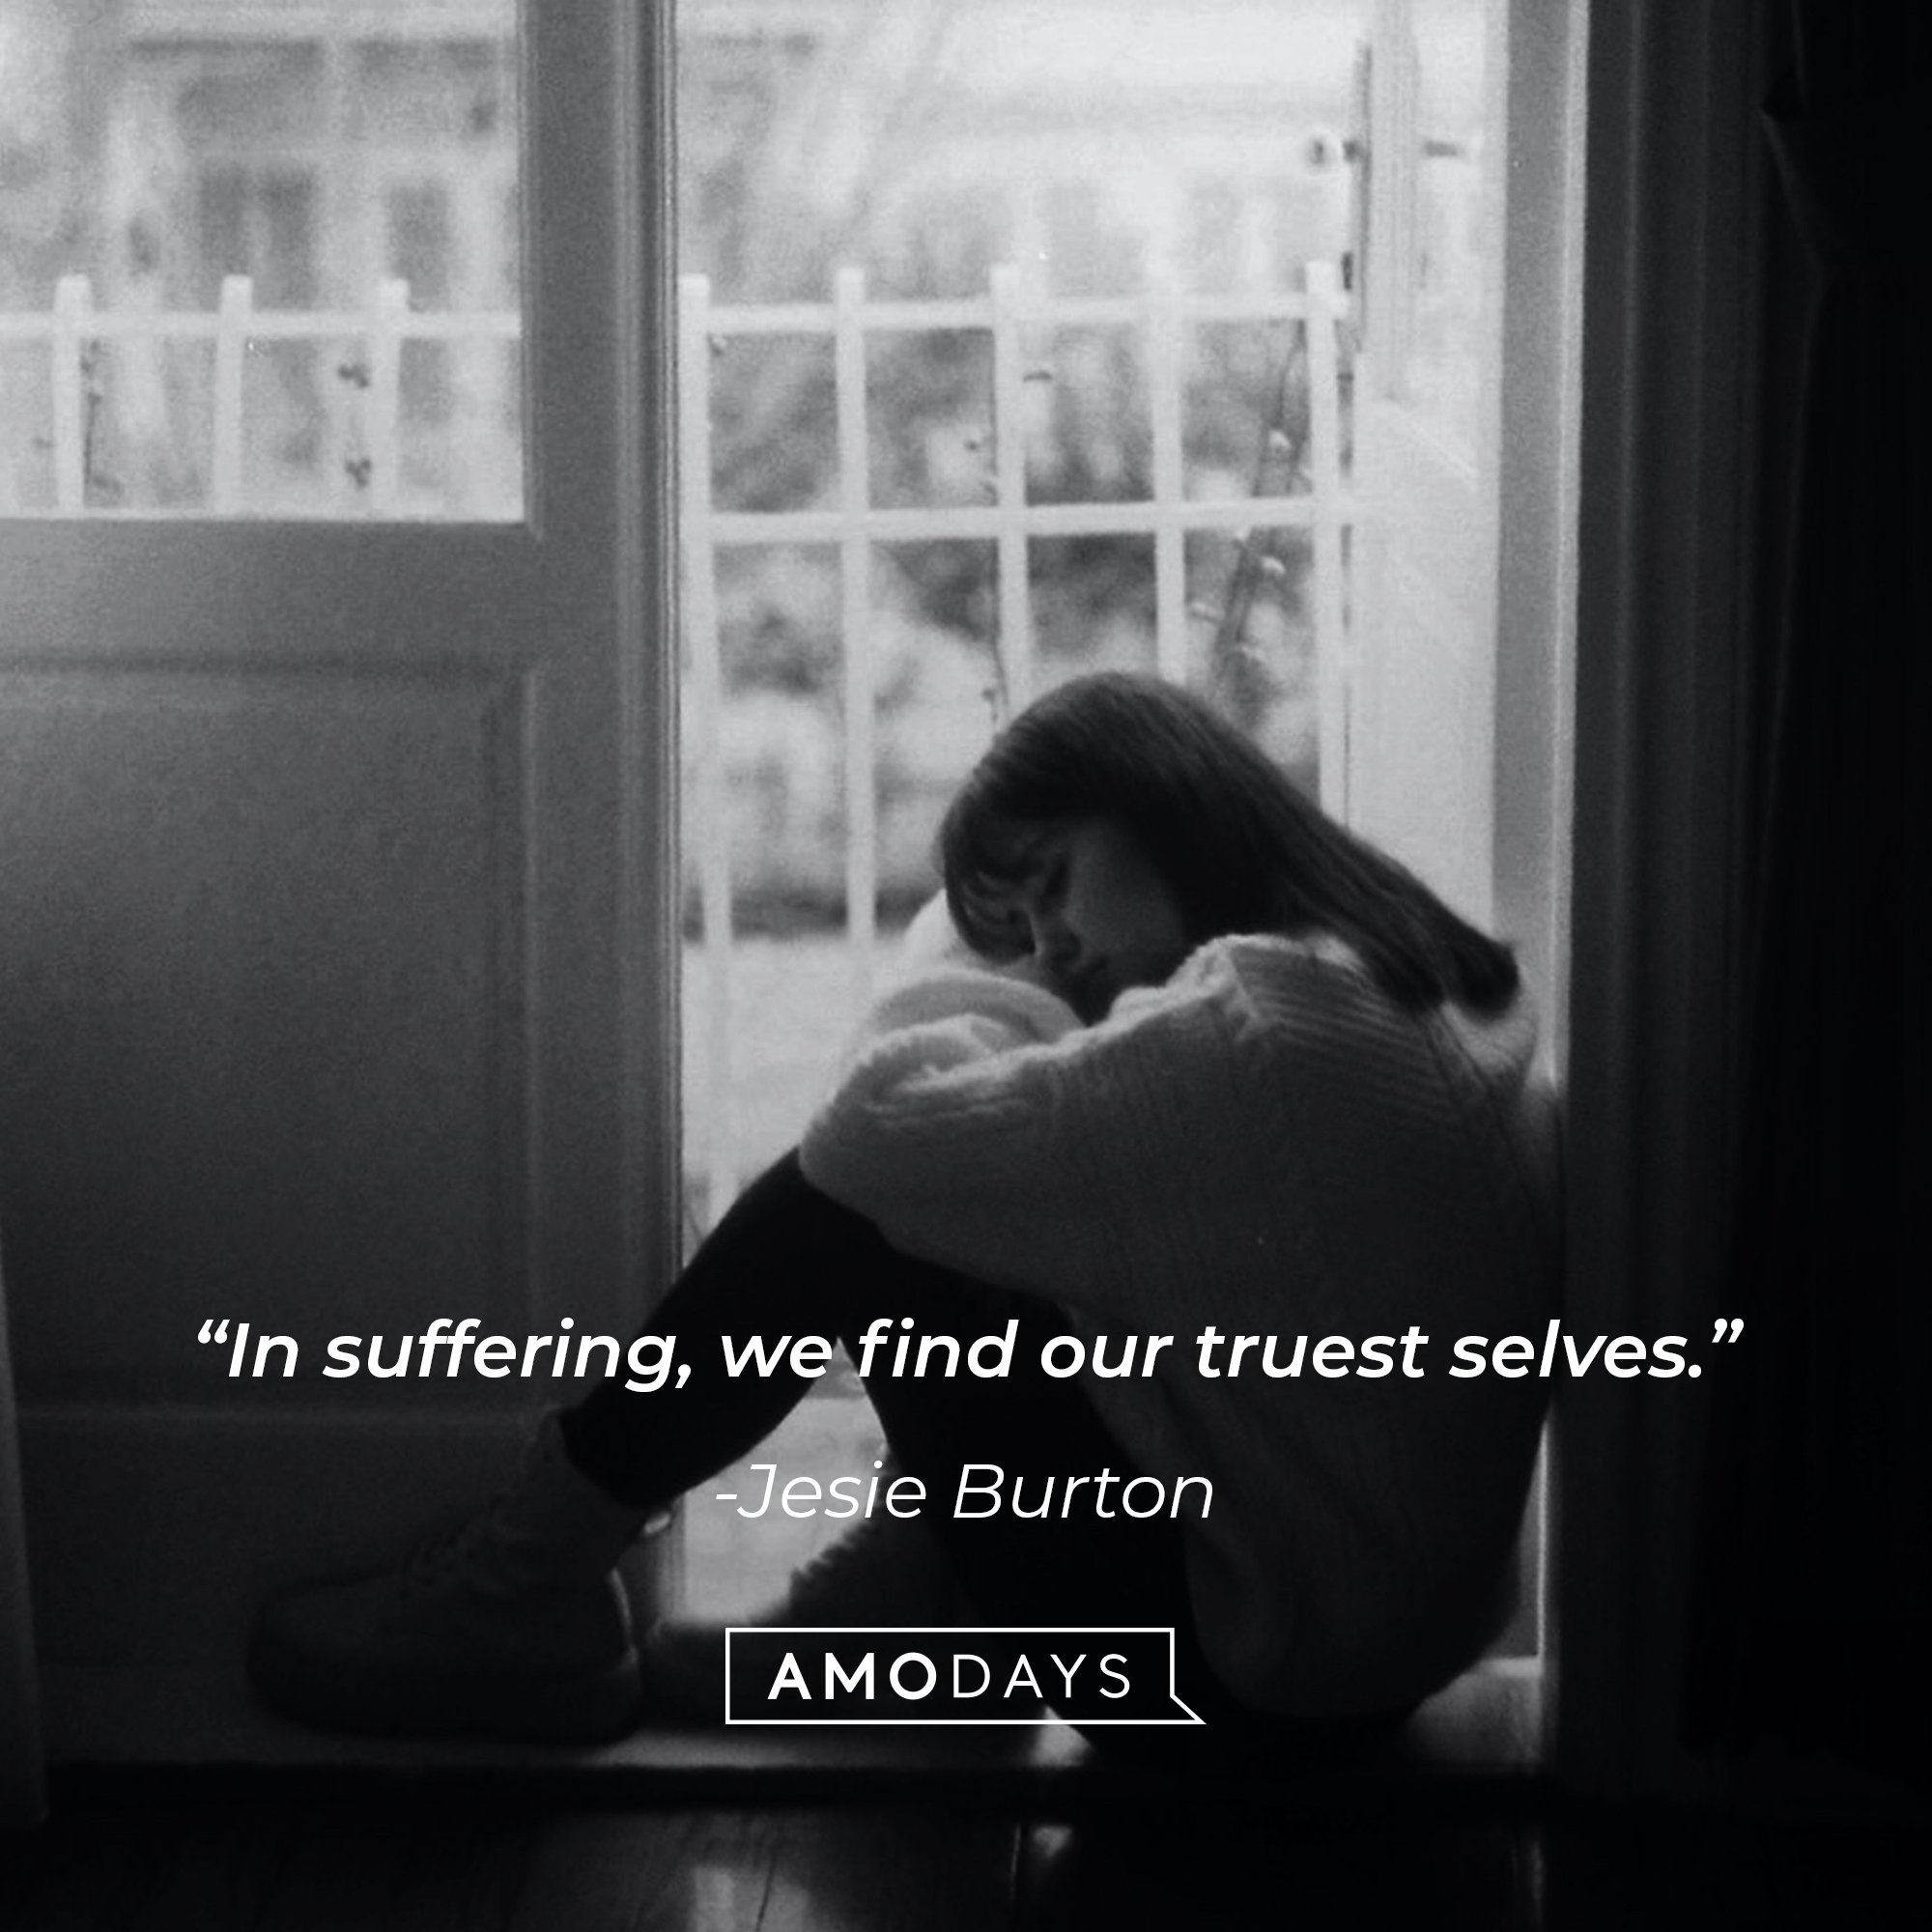 Jesie Burton's quote: “In suffering, we find our truest selves.”  | Image: AmoDays